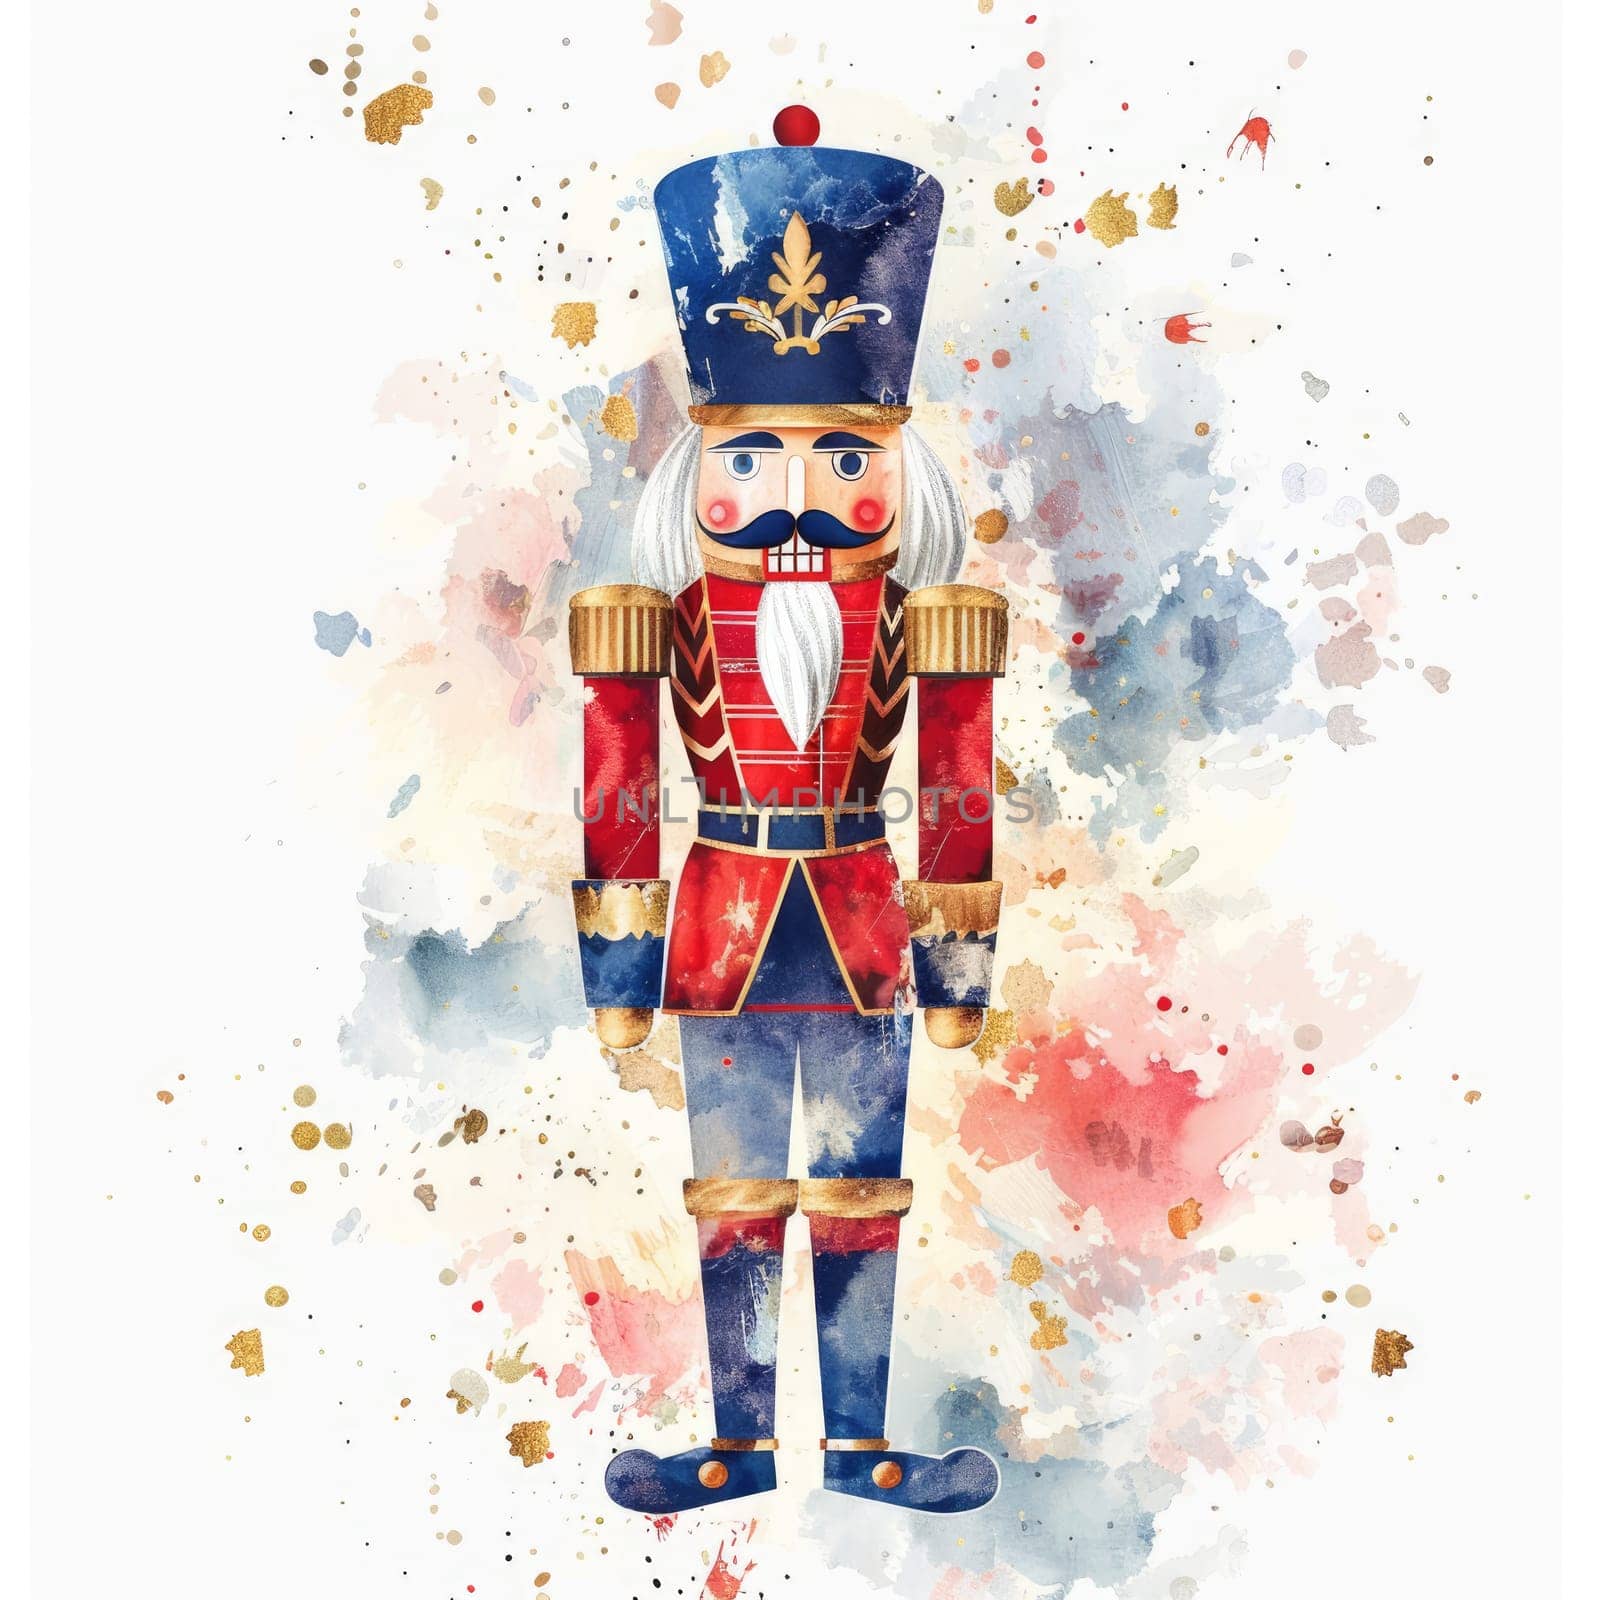 Nutcracker painted in watercolor on white paper by natali_brill